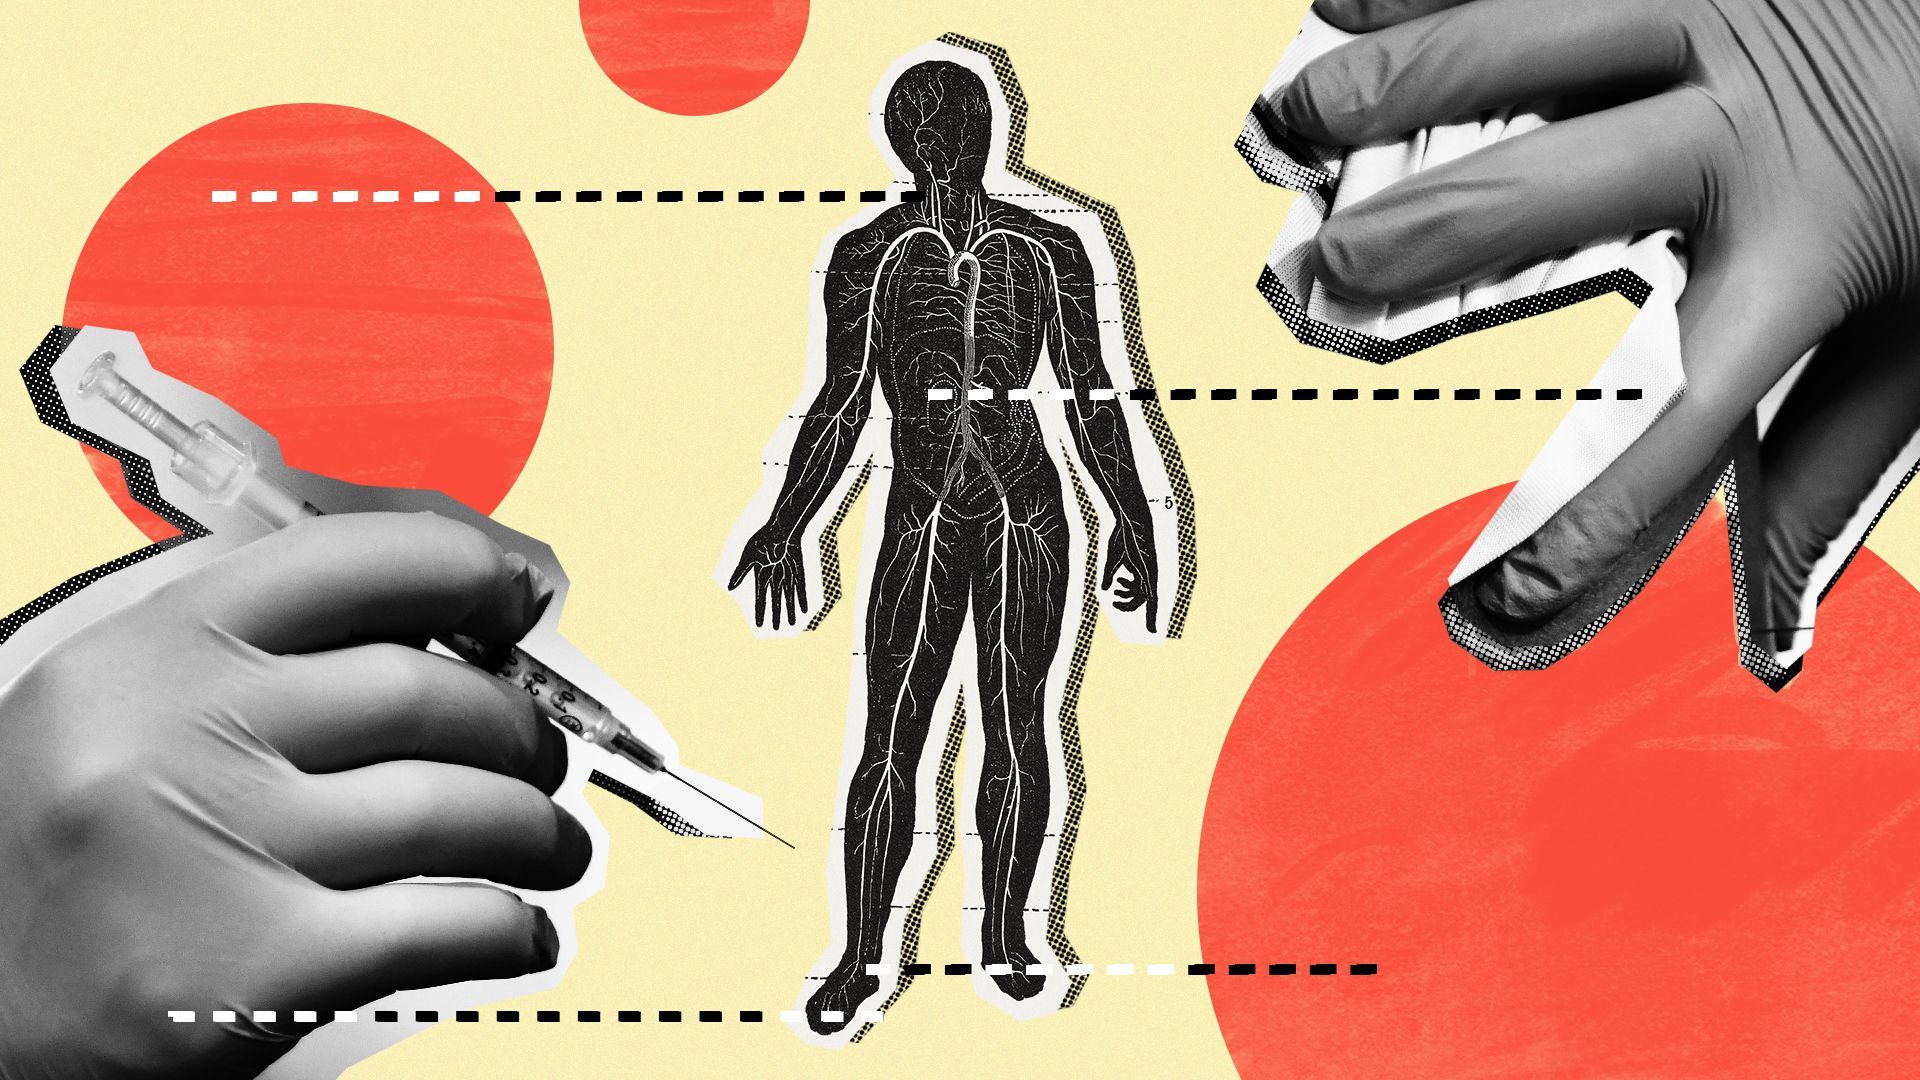  Photo illustration of an anatomical diagram surrounded by health care workers’ hands.